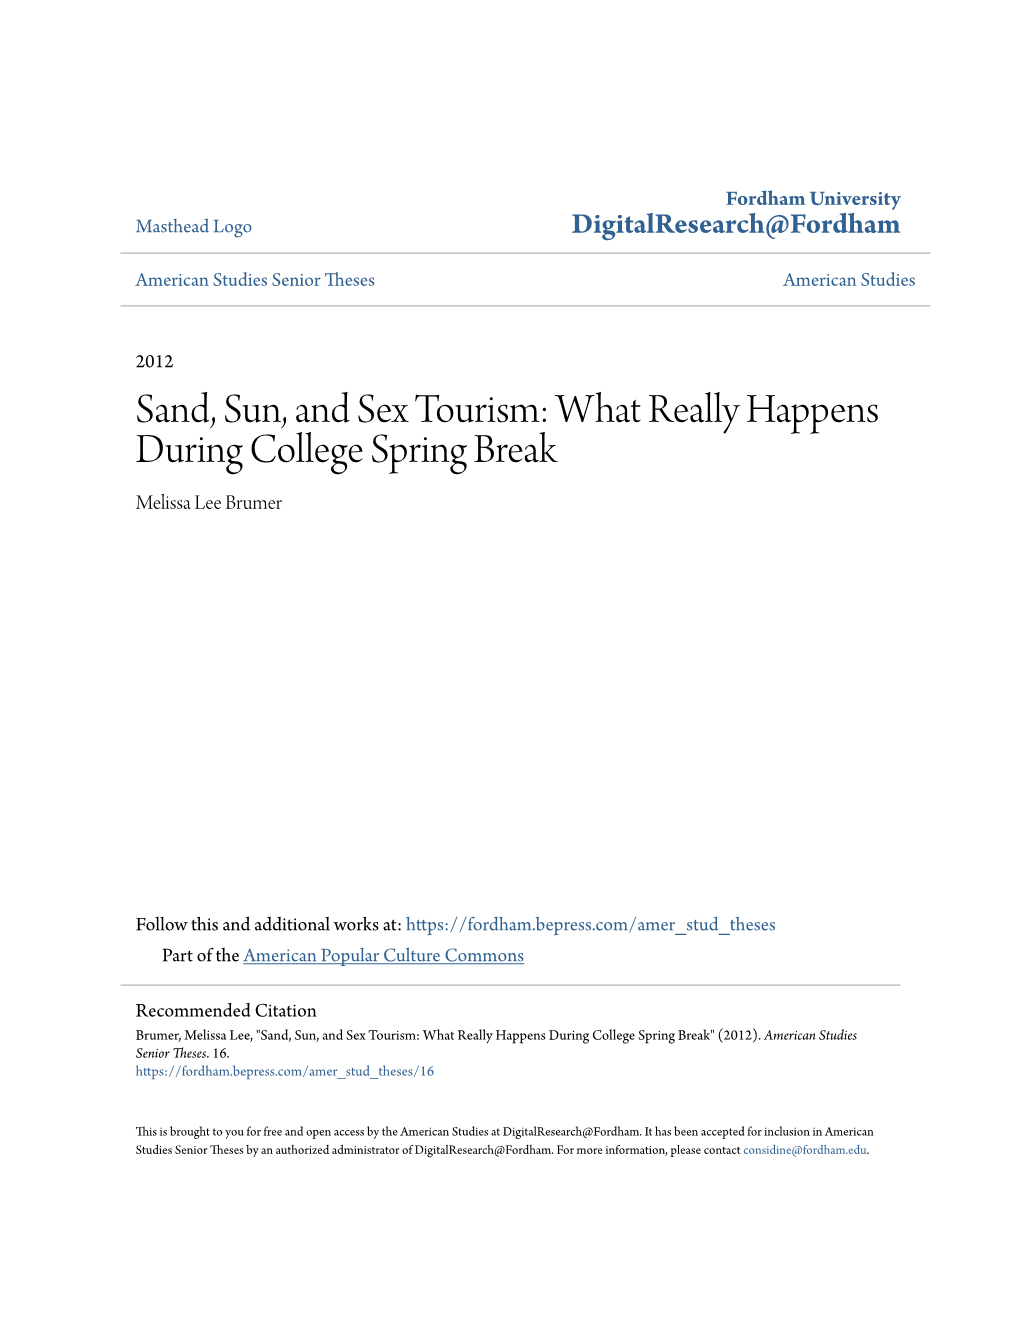 Sand, Sun, and Sex Tourism: What Really Happens During College Spring Break Melissa Lee Brumer